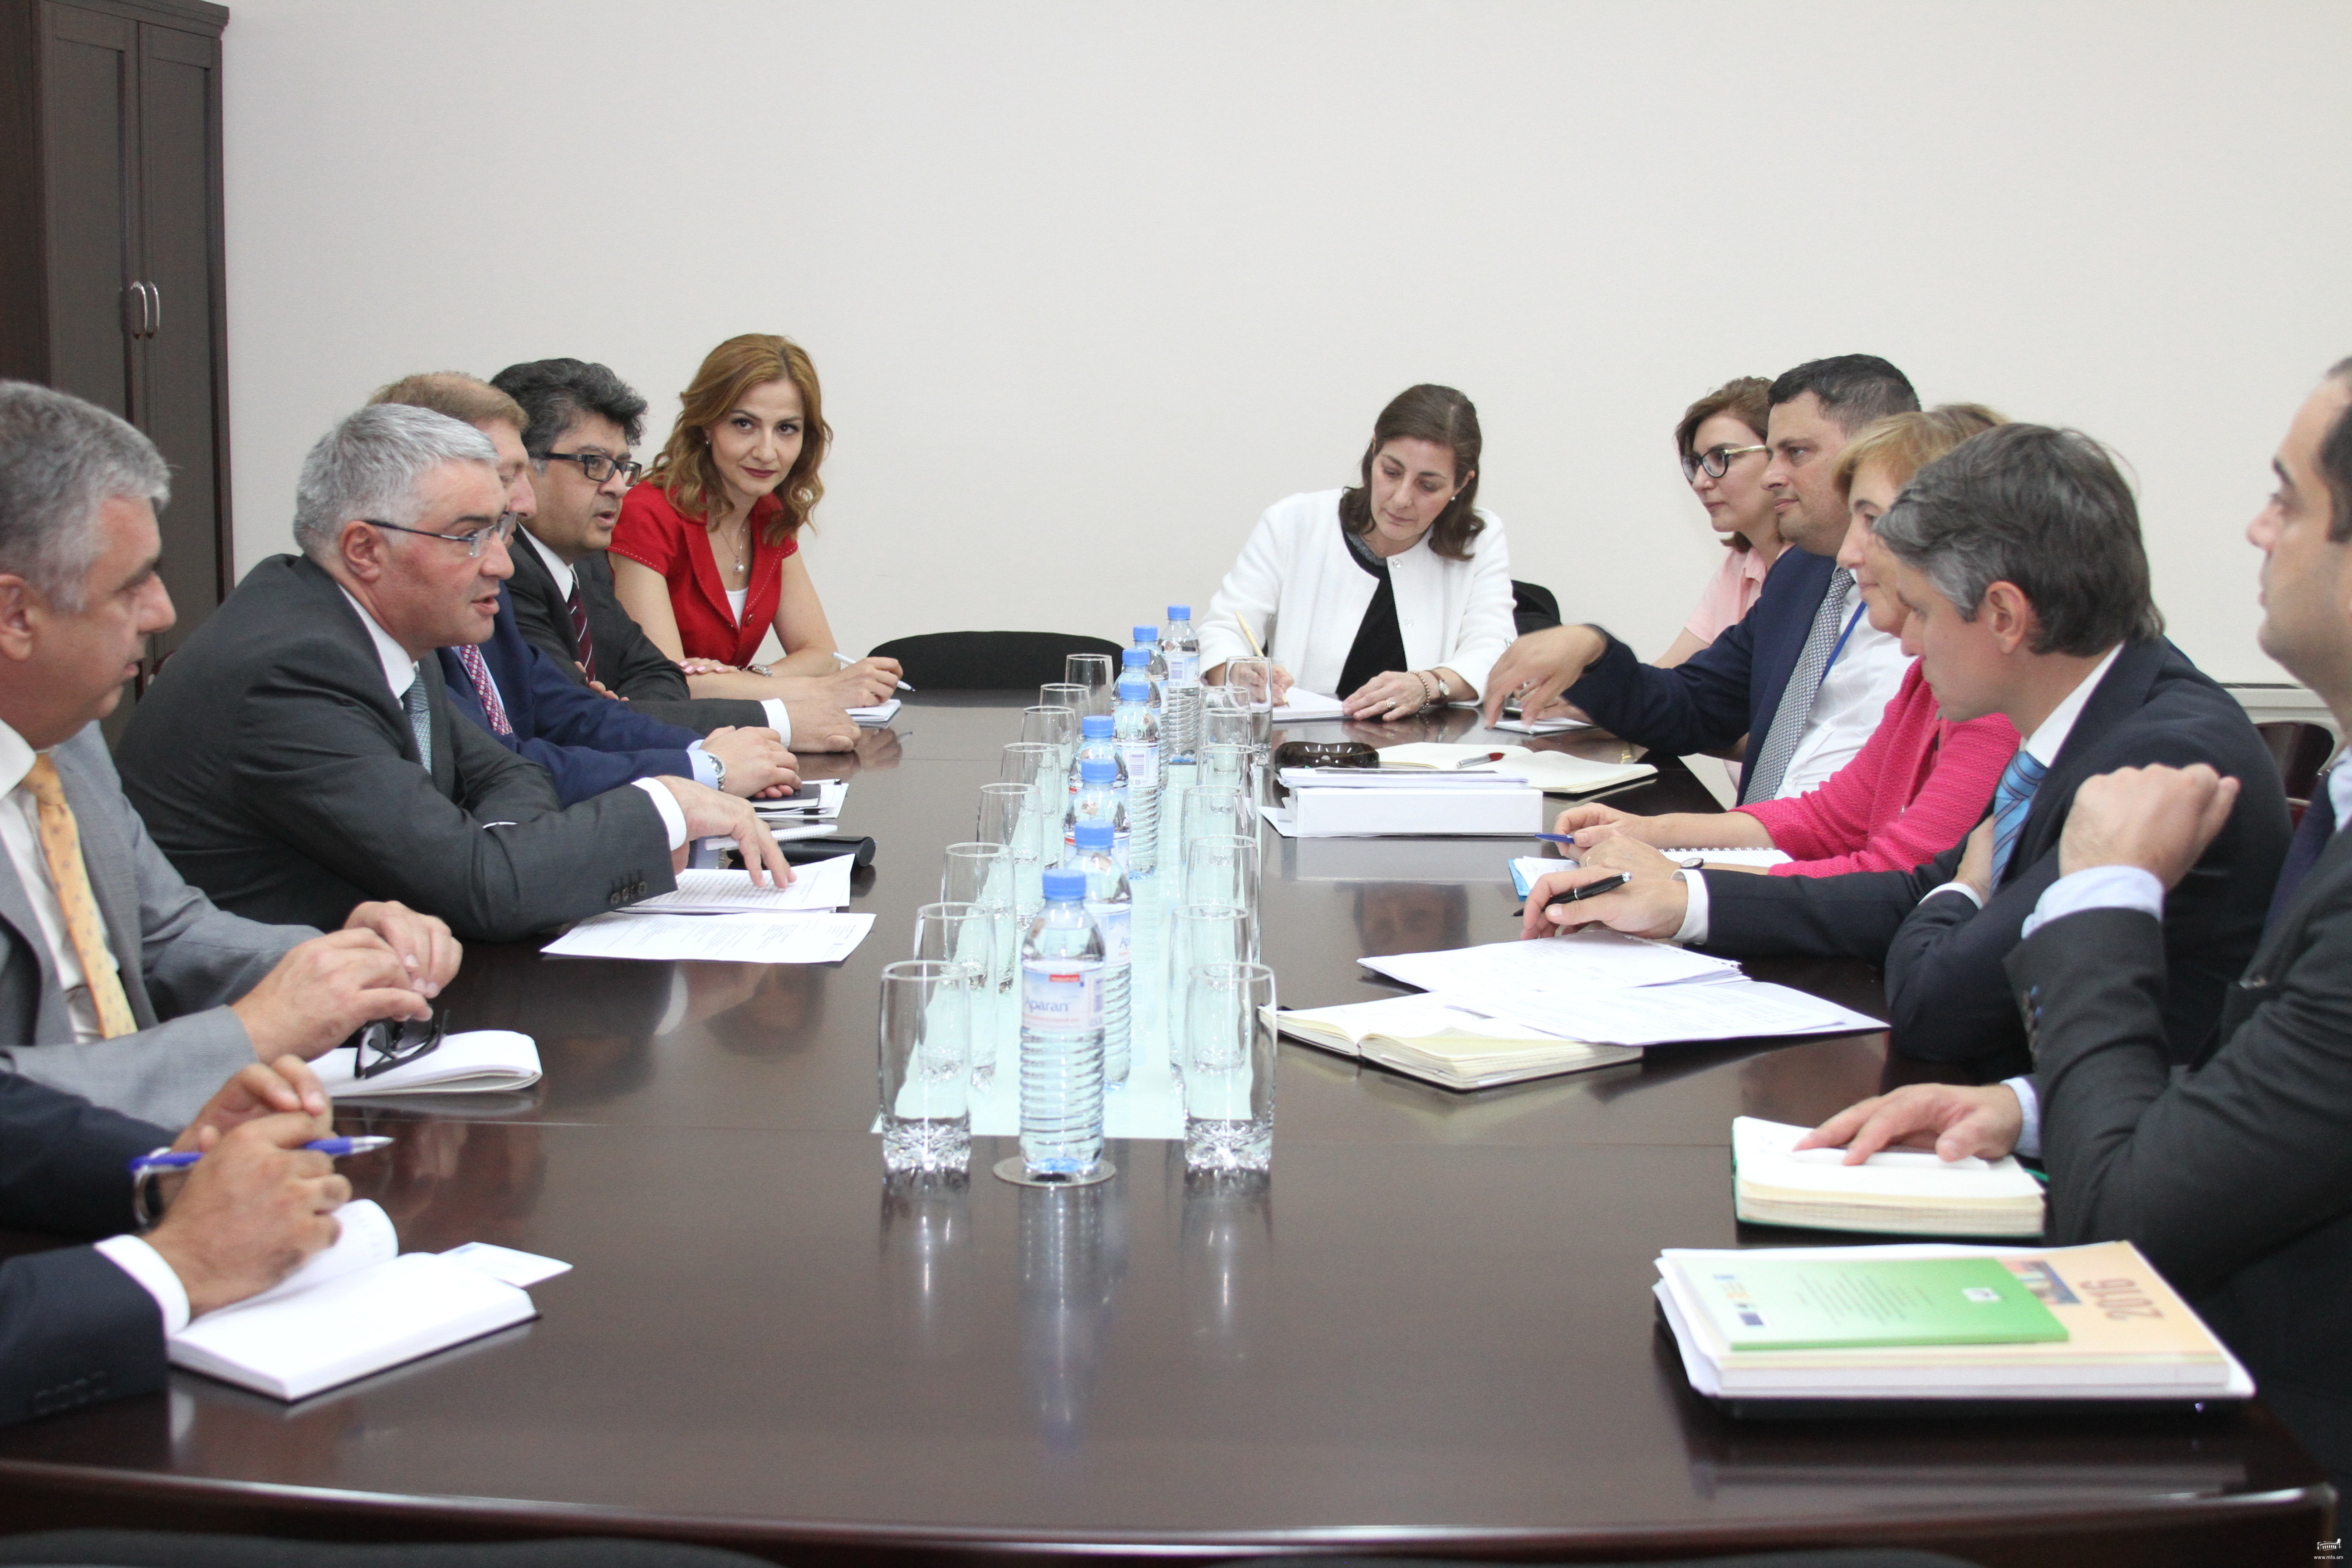 Deputy Minister of Foreign Affairs Ashot Hovakimian met experts on Sustainable Development Goals of UNDP Bureau for Policy and Programme Support